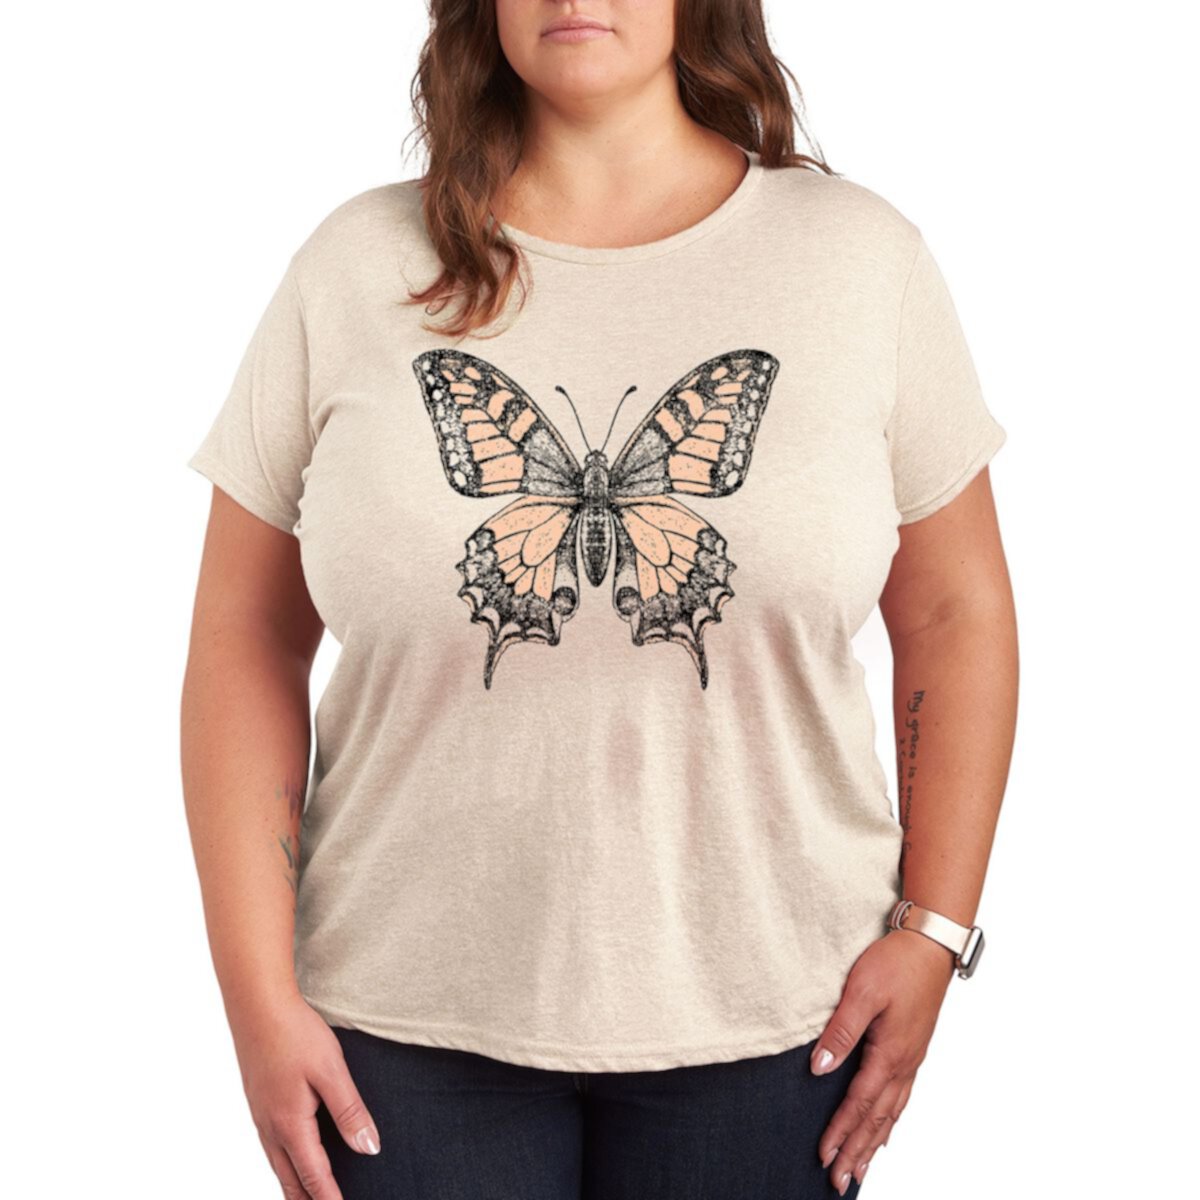 Plus Swallowtail Butterfly Graphic Tee Unbranded